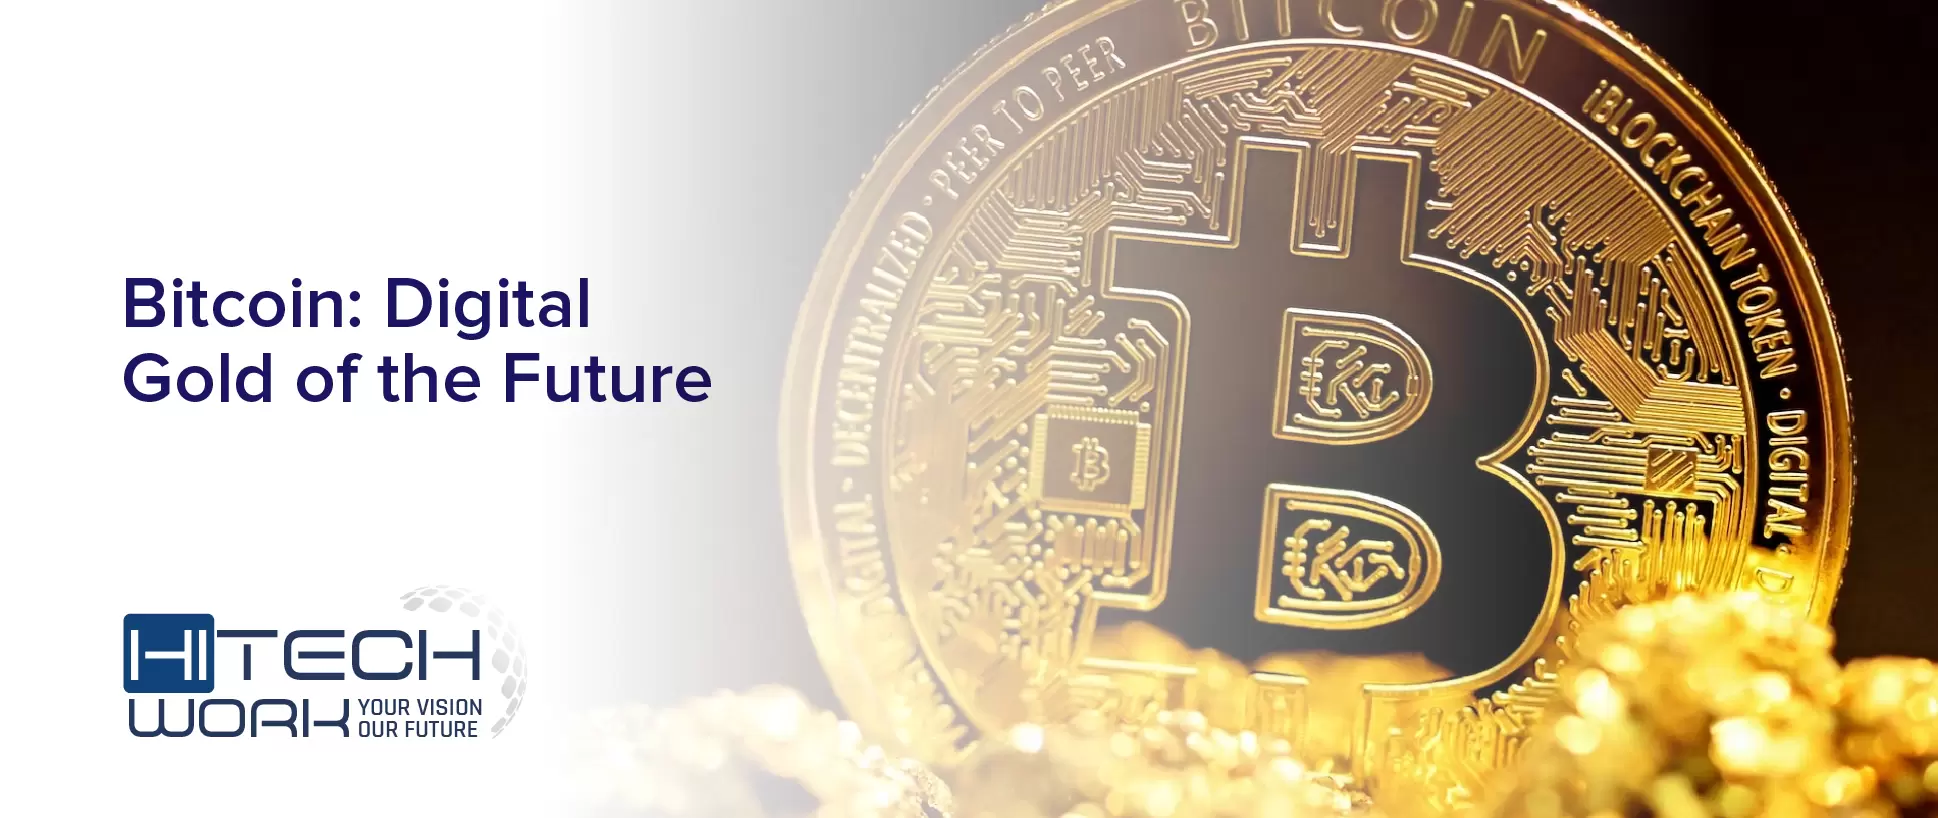 Digital Gold of the Future